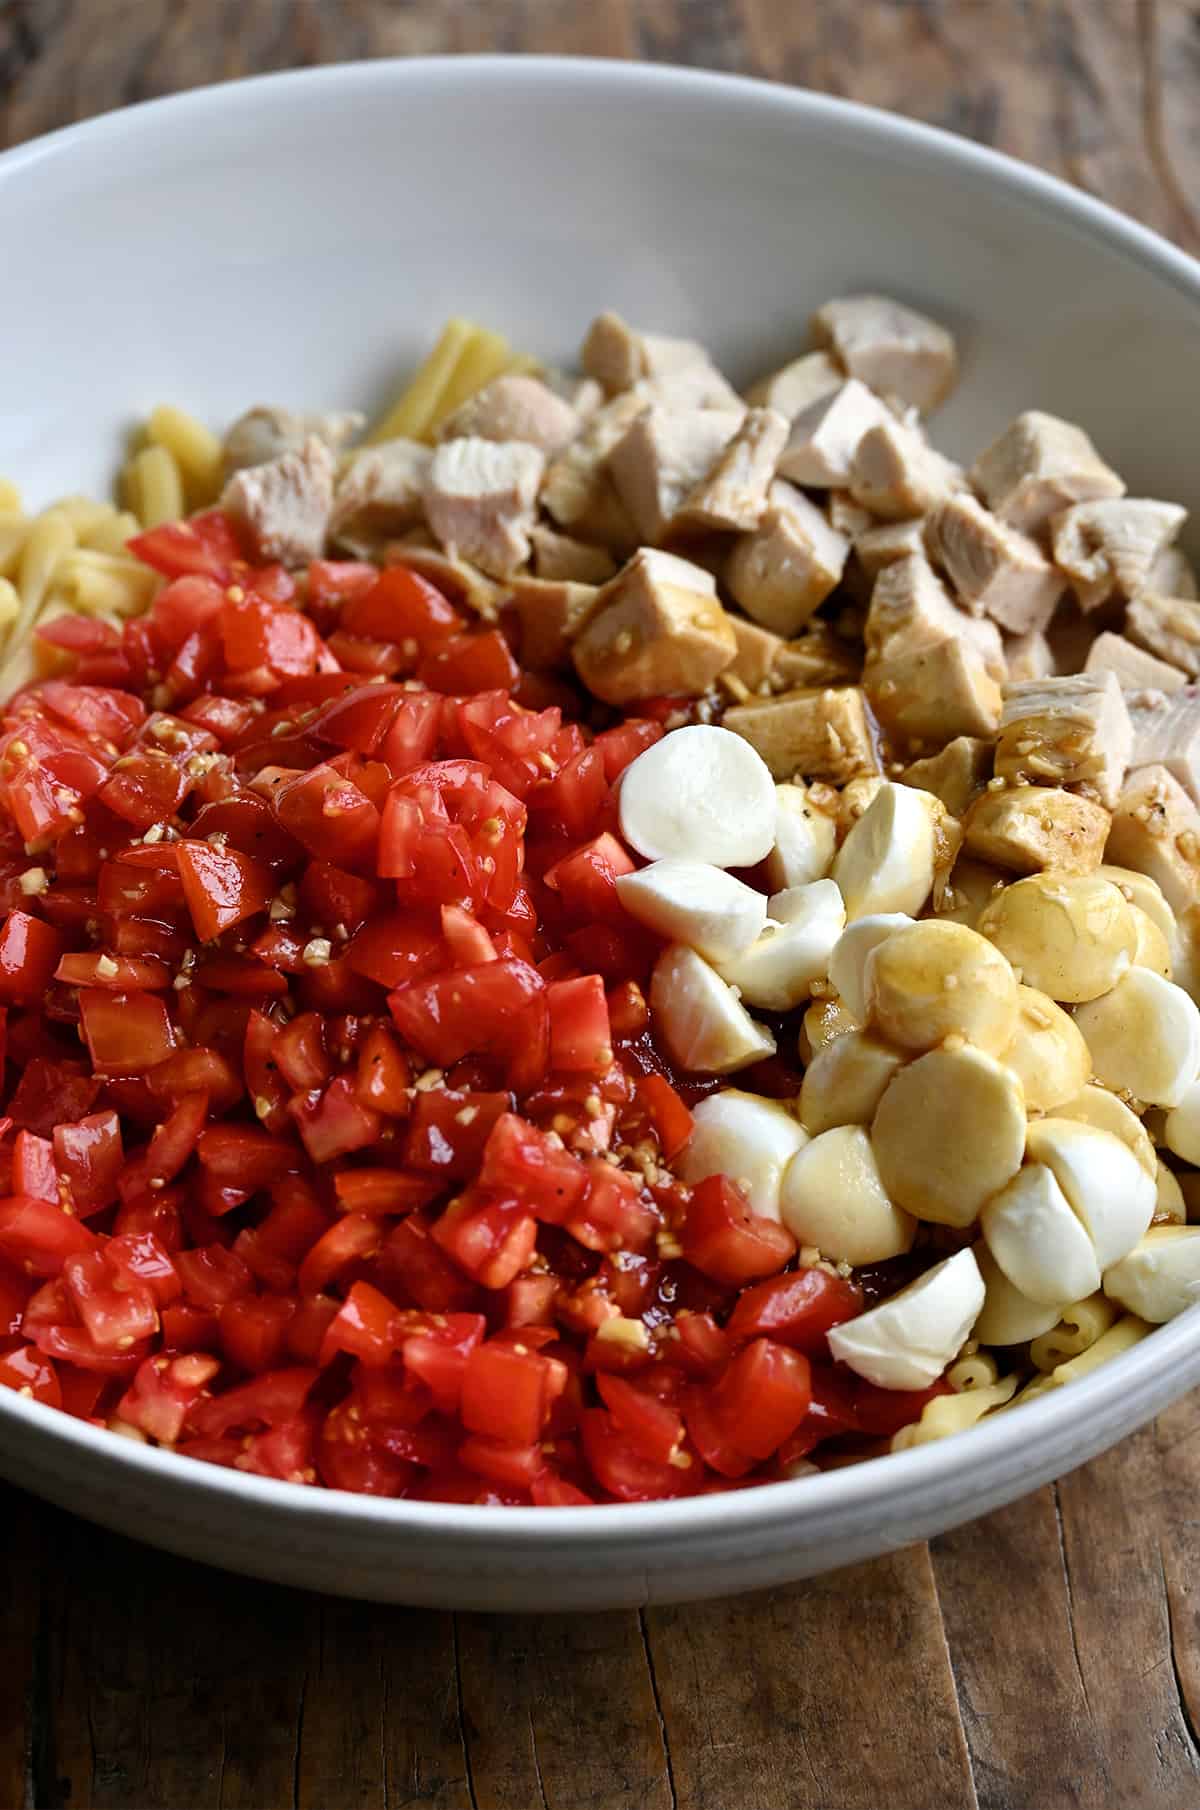 A large serving bowl containing diced tomatoes, cubed chicken, halved mini mozzarella balls and cooked noodles.